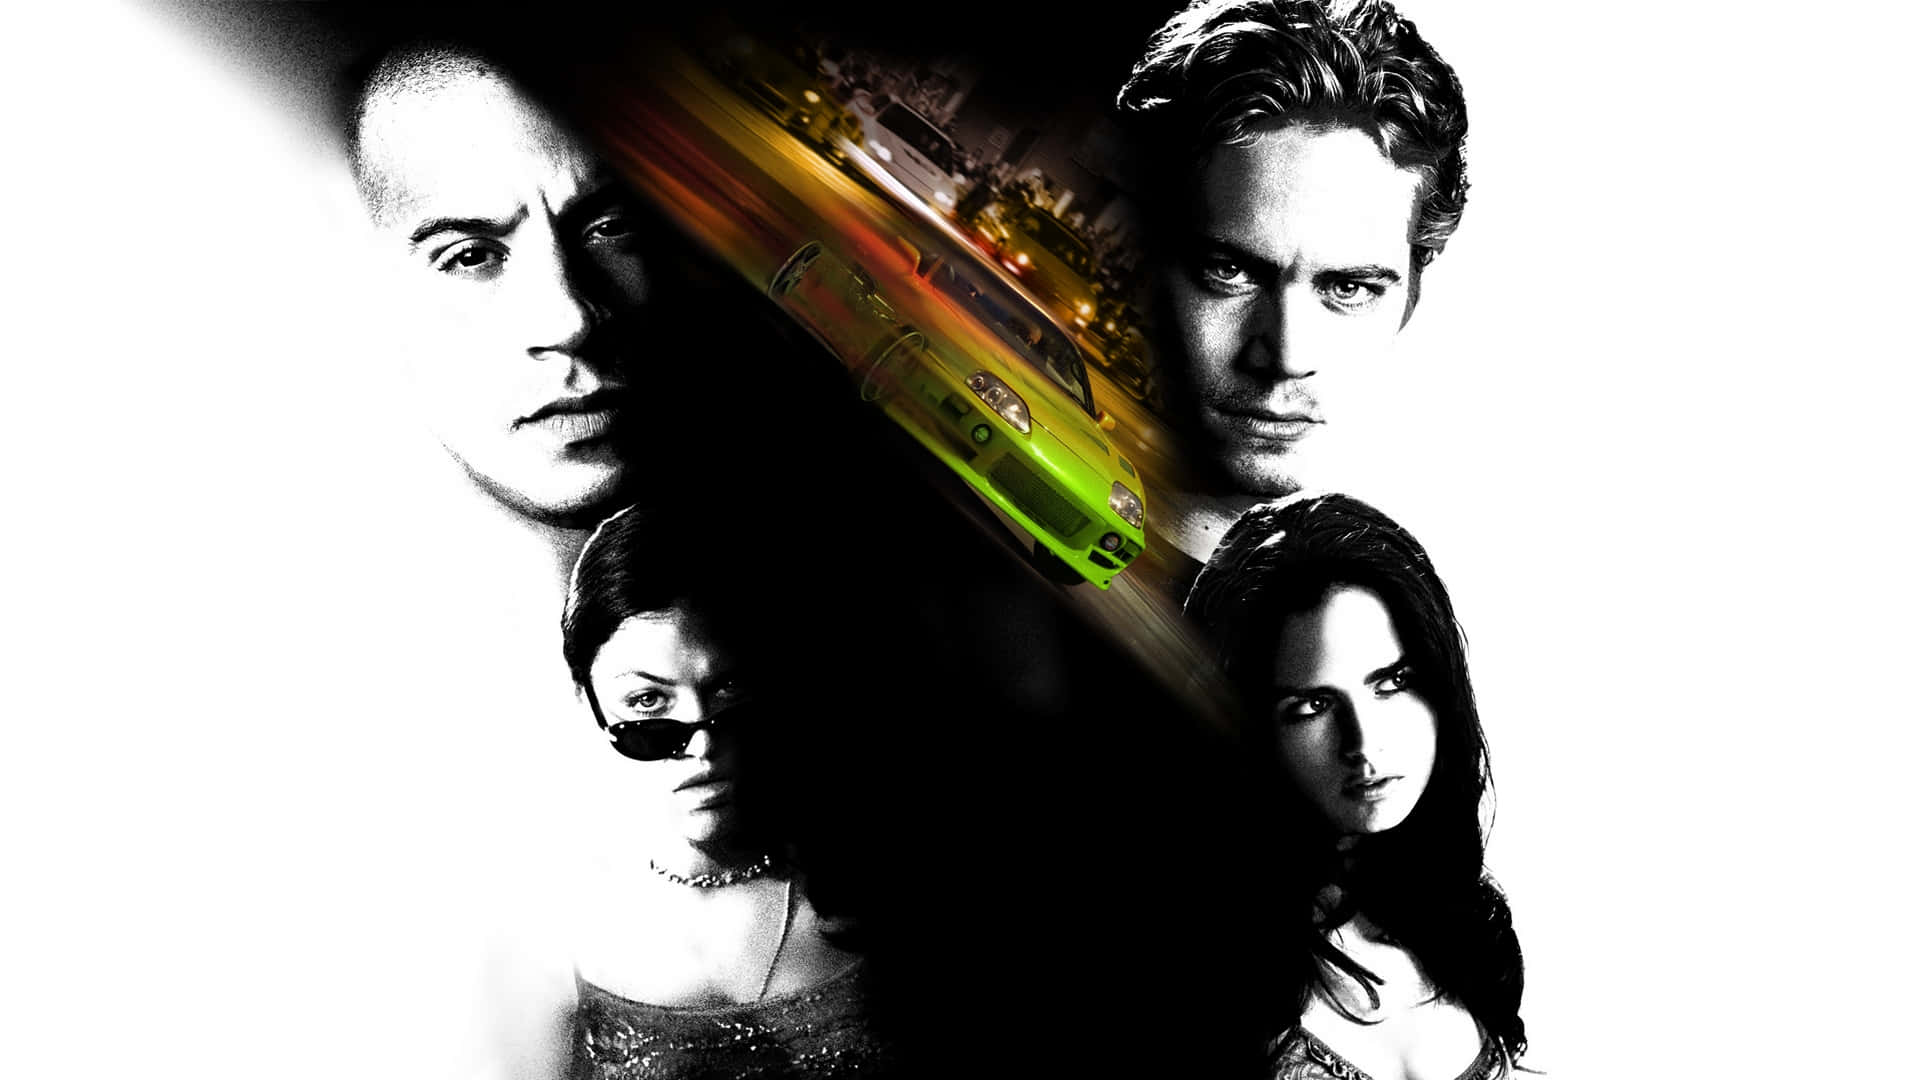 Dominictoretto Führt Die Besetzung Des Kultklassikers The Fast And The Furious An. Wallpaper